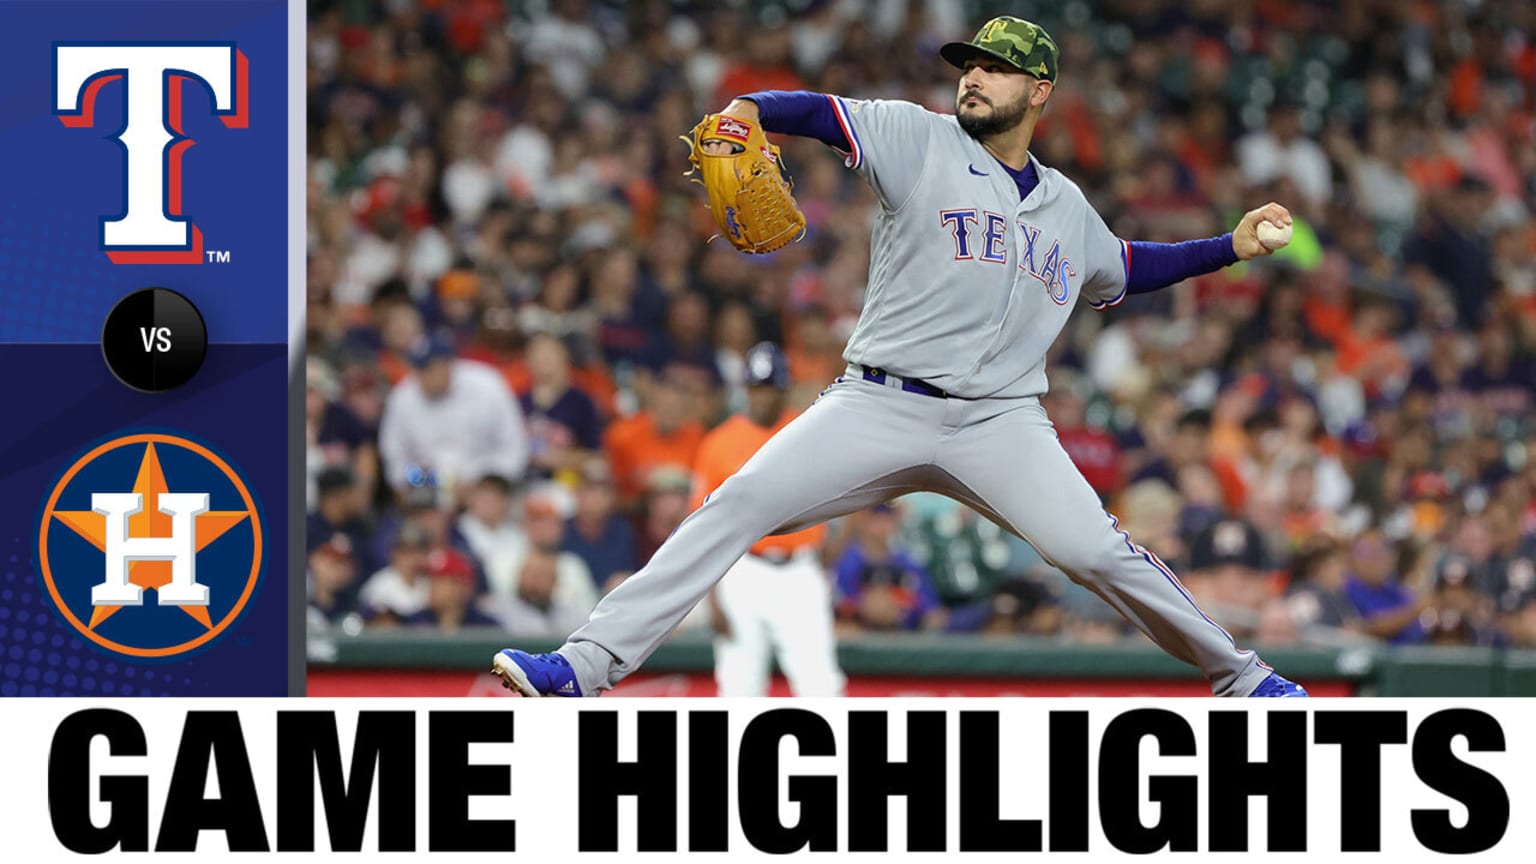 Rangers vs. Astros Highlights 05/20/2022 Chicago Cubs